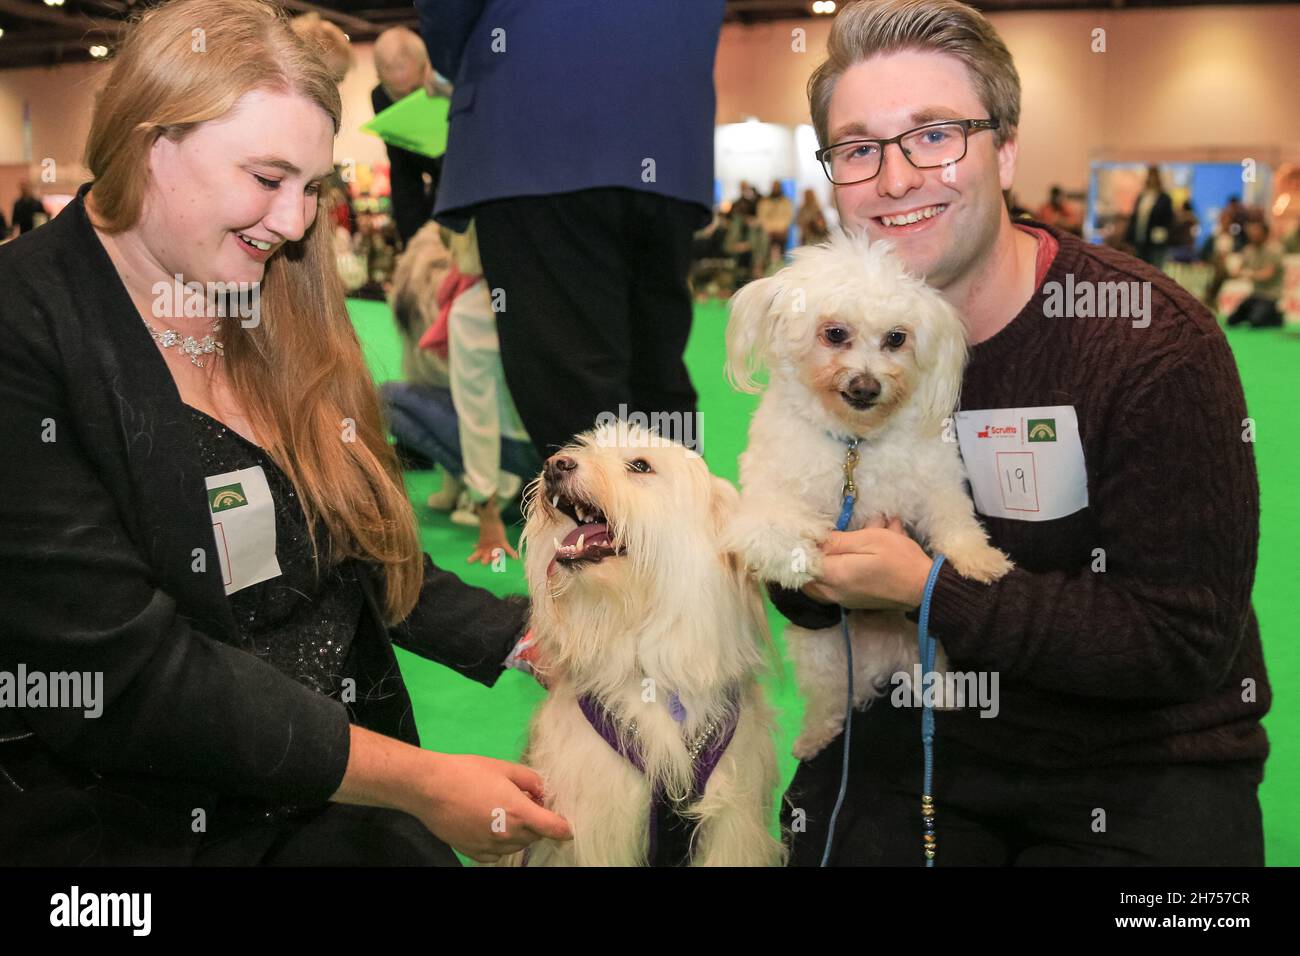 Excel Exhibition Centre, London, UK. 20th Nov, 2021. Mopsie (dog on left) and Sammie (dog on right) are two rescue cross breed dogs at the show with their lovely owners, and competing in Crufts 'most handsome dogs' competition. London's biggest dog event, Discover Dogs, returns to ExCeL London, giving visitors the opportunity to meet, greet and cuddle hundreds of dogs, and to celebrate the ways in which man's best friend helped thousands and have been our everyday heroes during the pandemic. The show is organised by The Kennel Club. Credit: Imageplotter/Alamy Live News Stock Photo